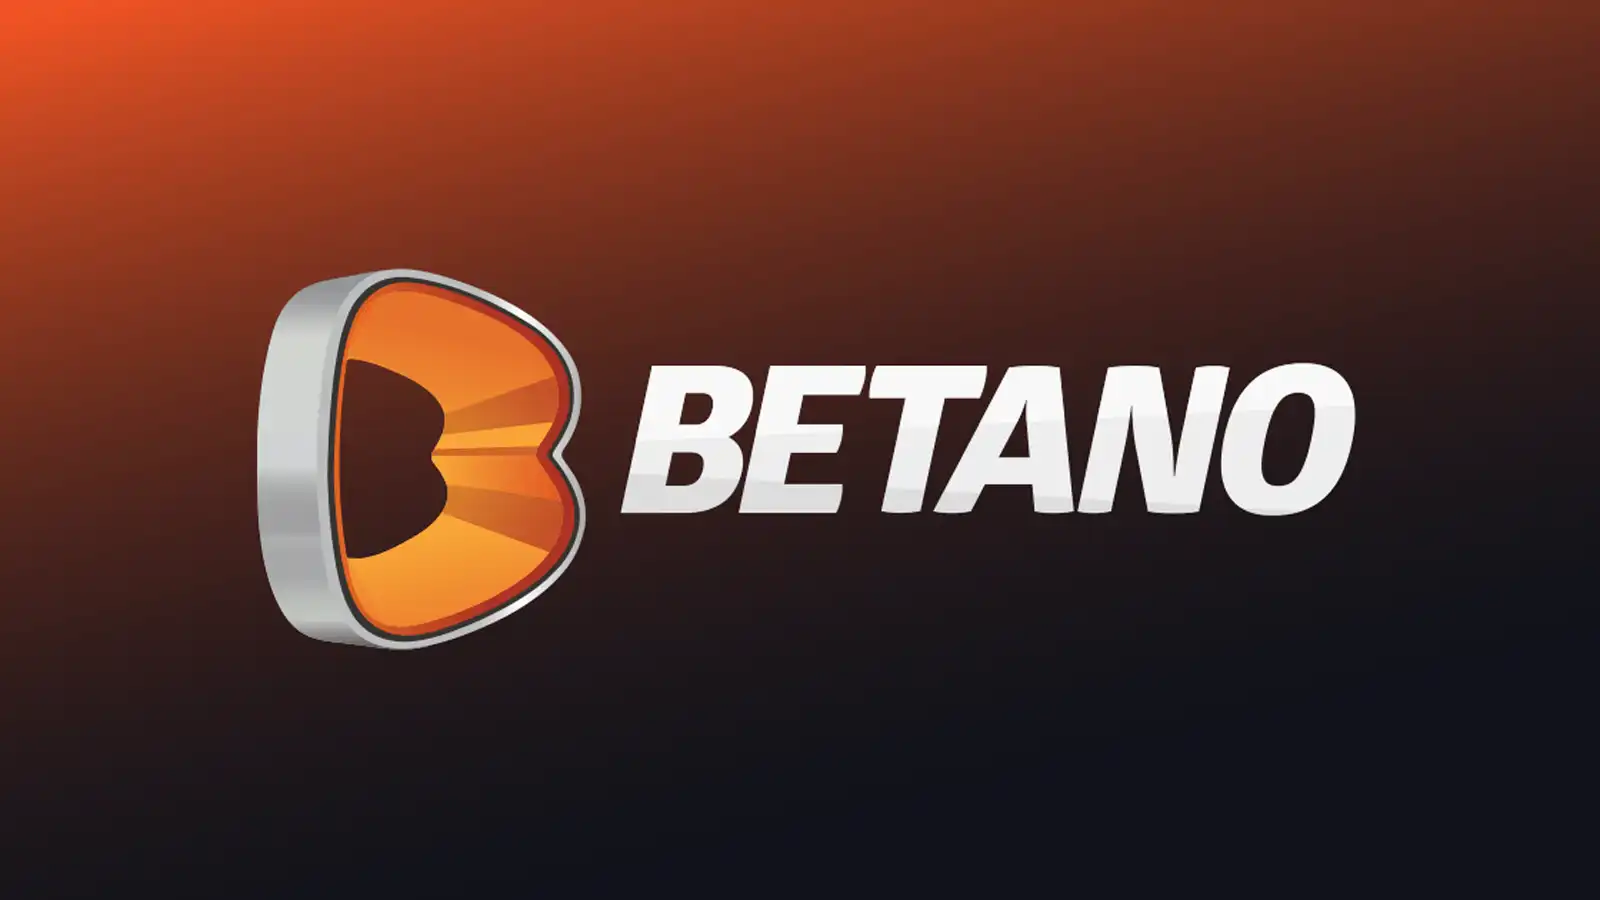 Promotional image for Betano displaying their logo and branding